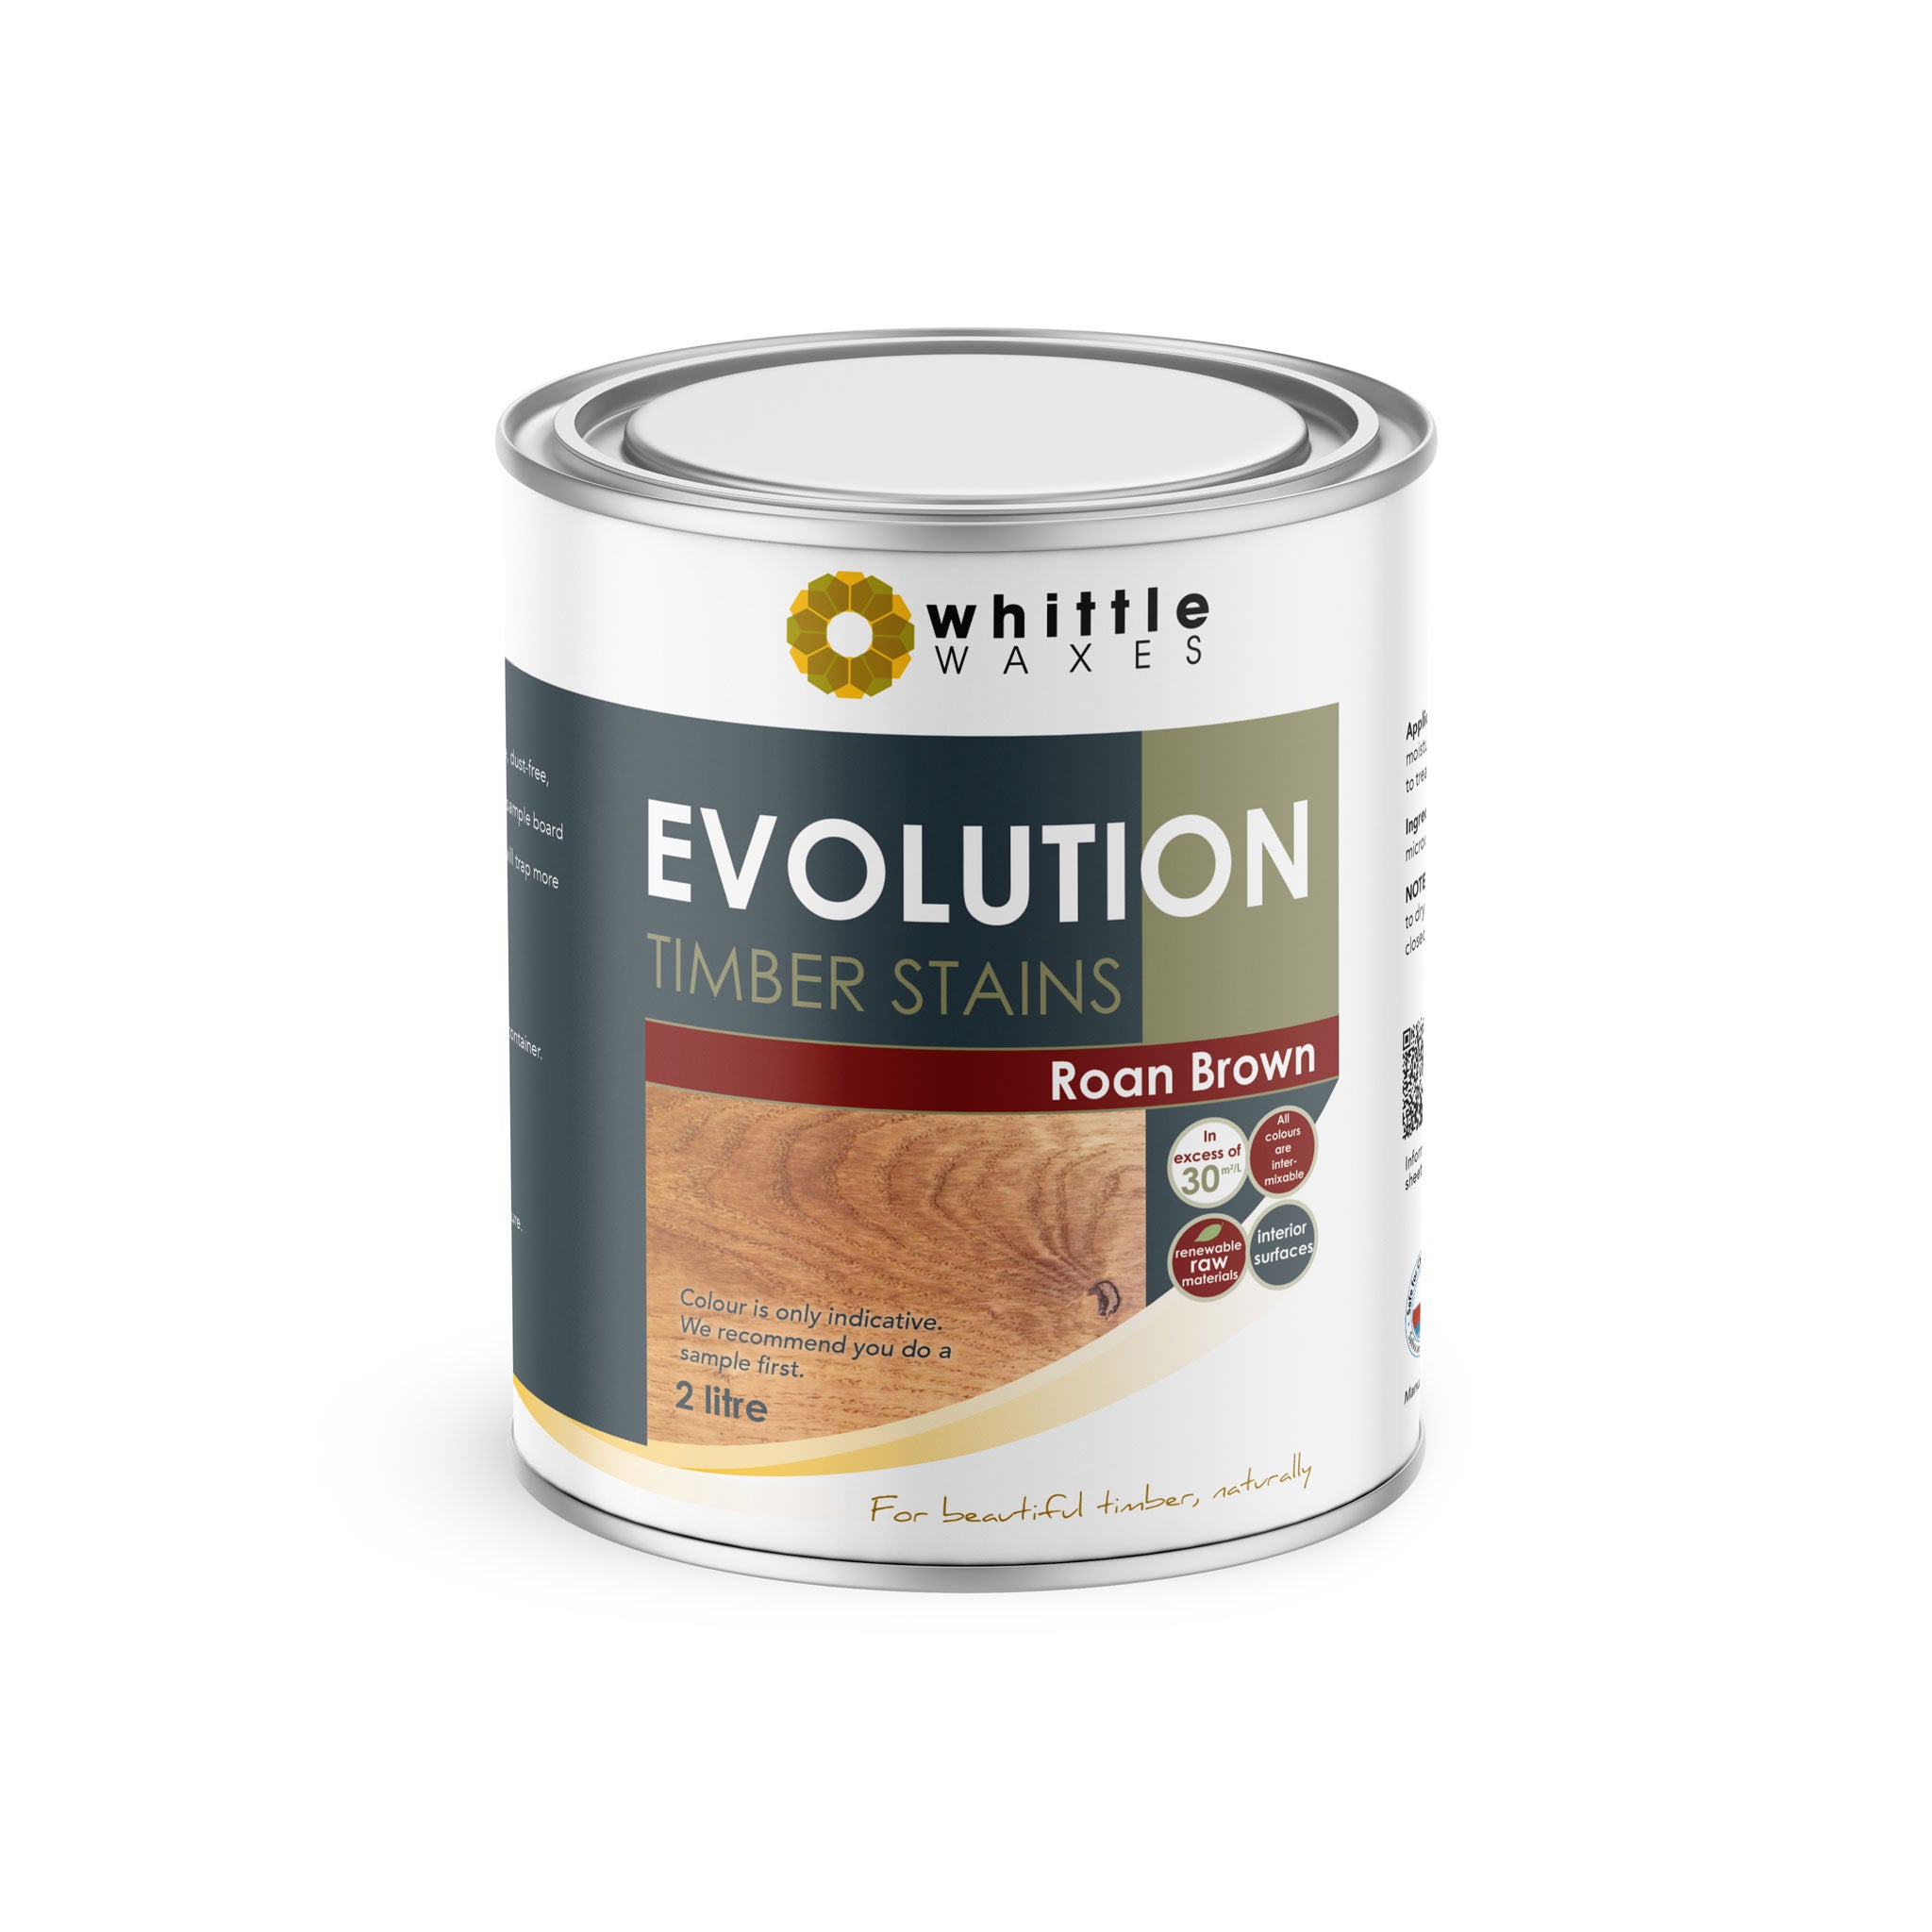 Whittle Waxes Evolution Colours (Roan Brown) - quality timber stain - 2 Litre